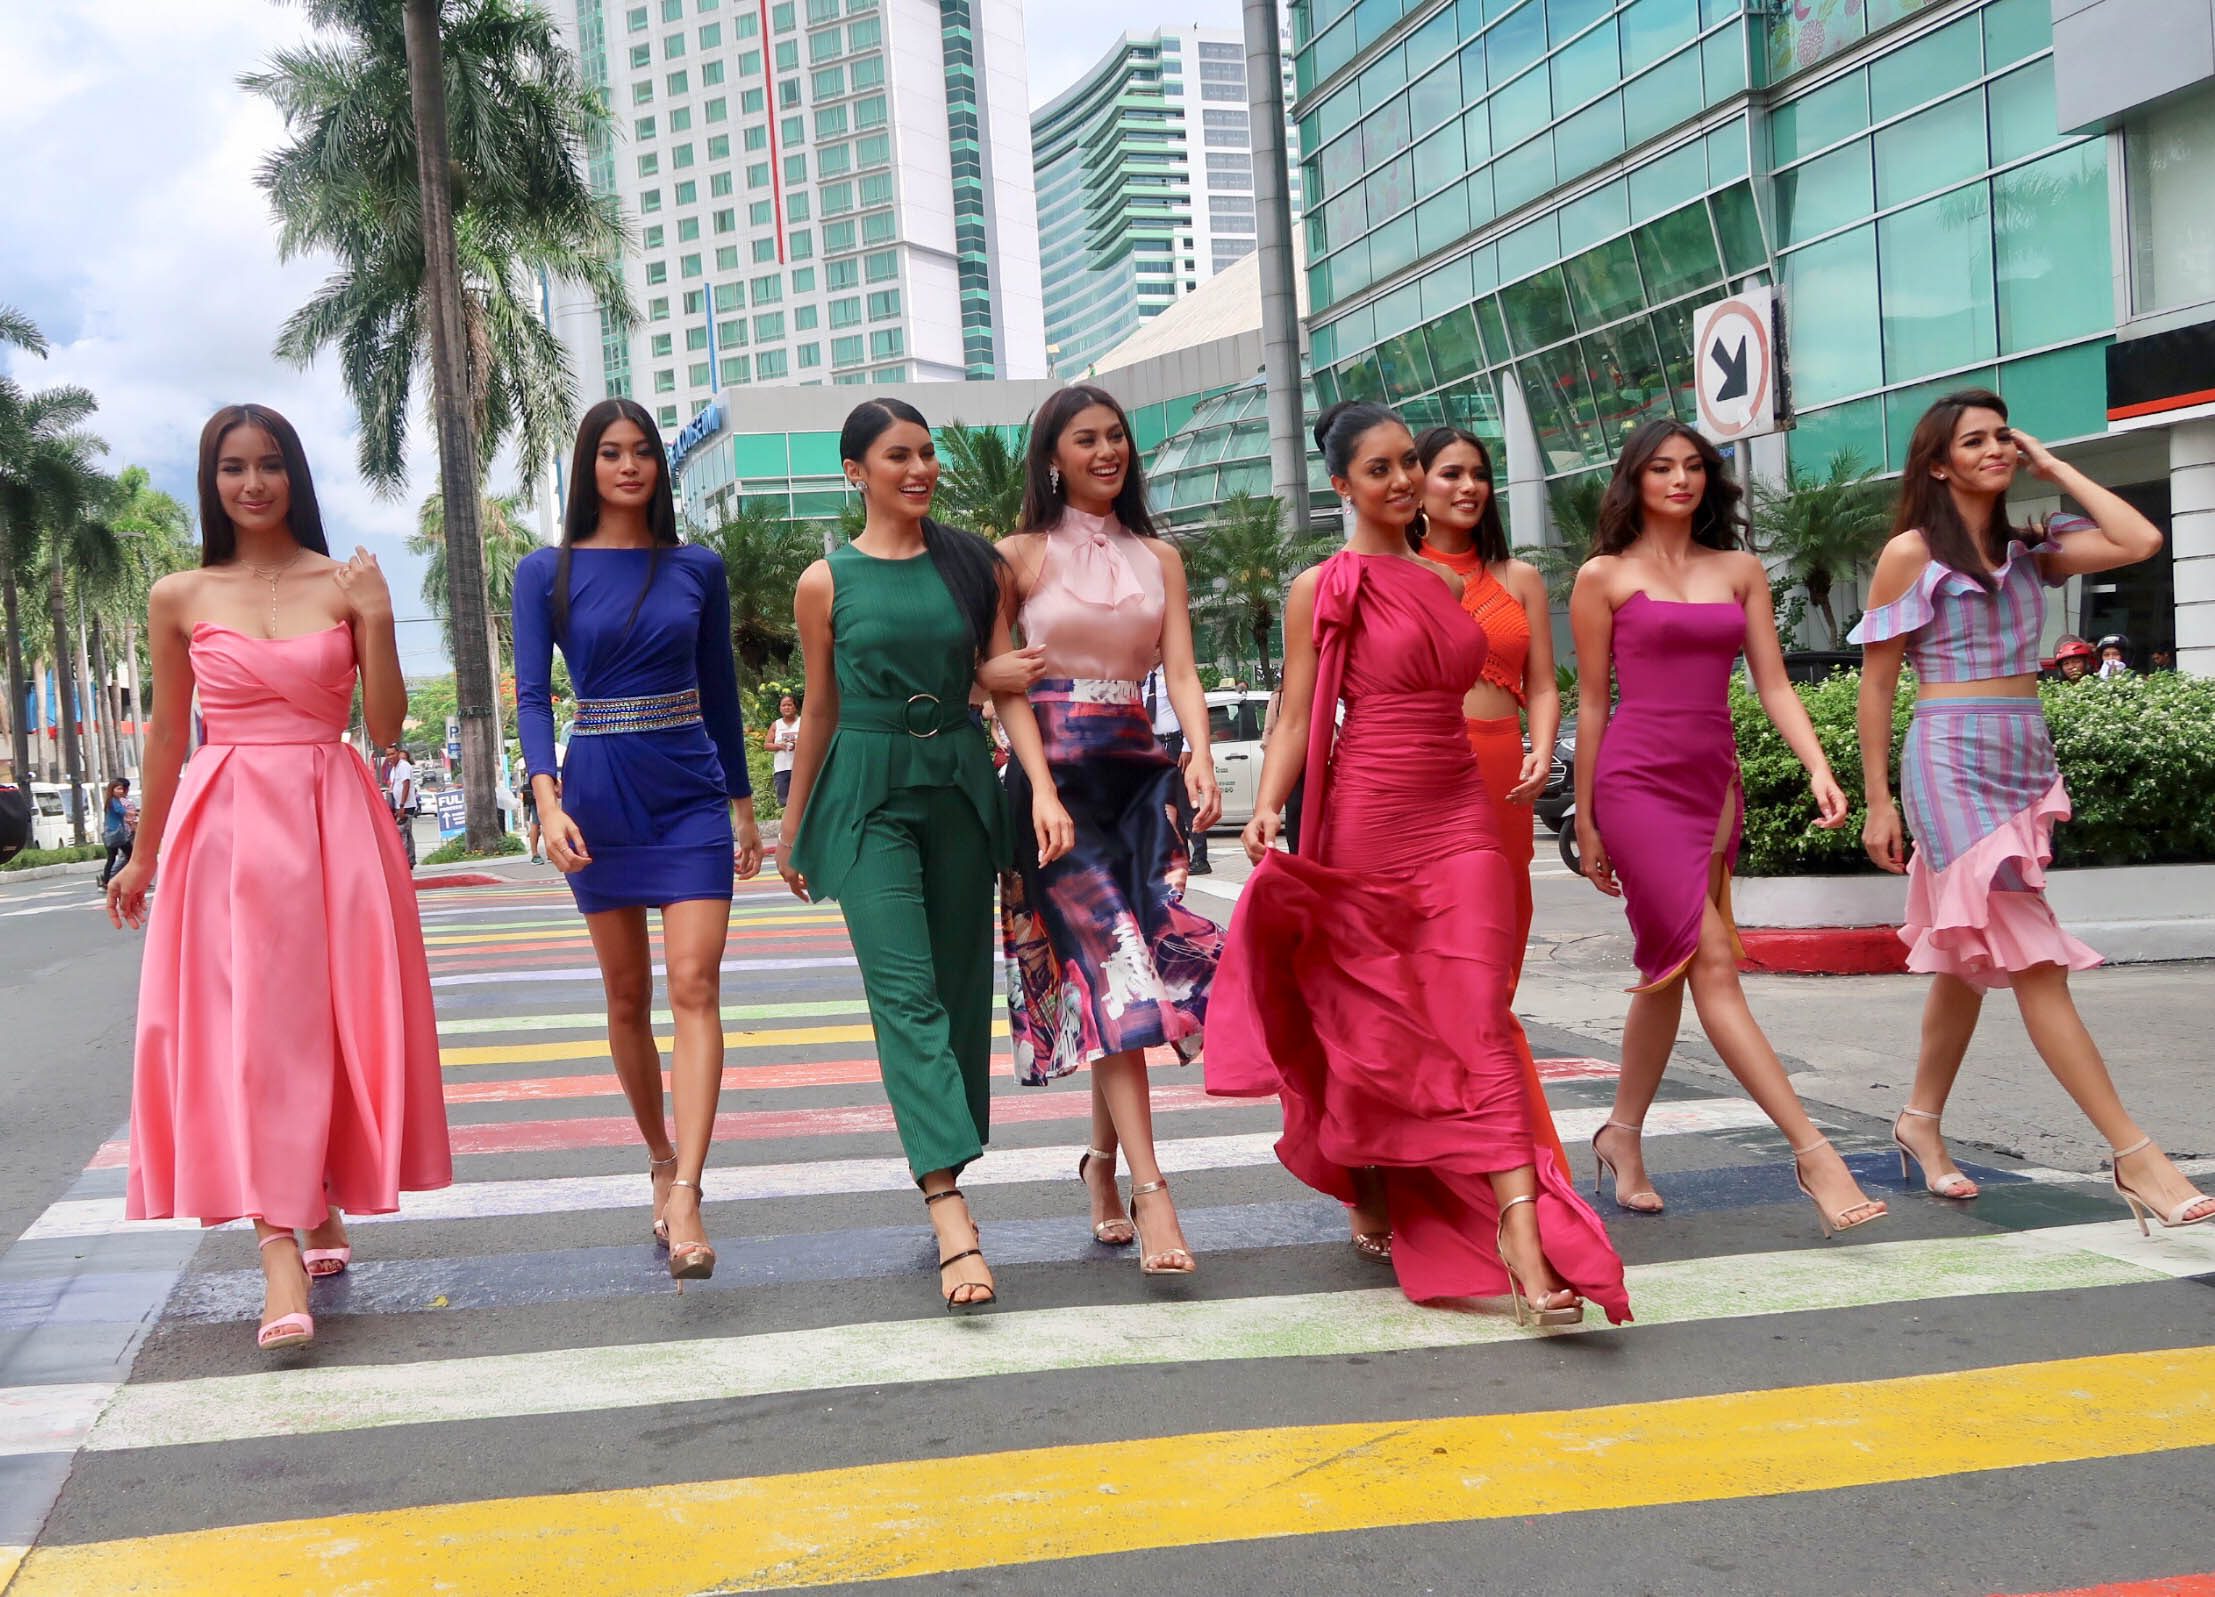 WATCH: Binibining Pilipinas queens show support for the LGBTQ+ community